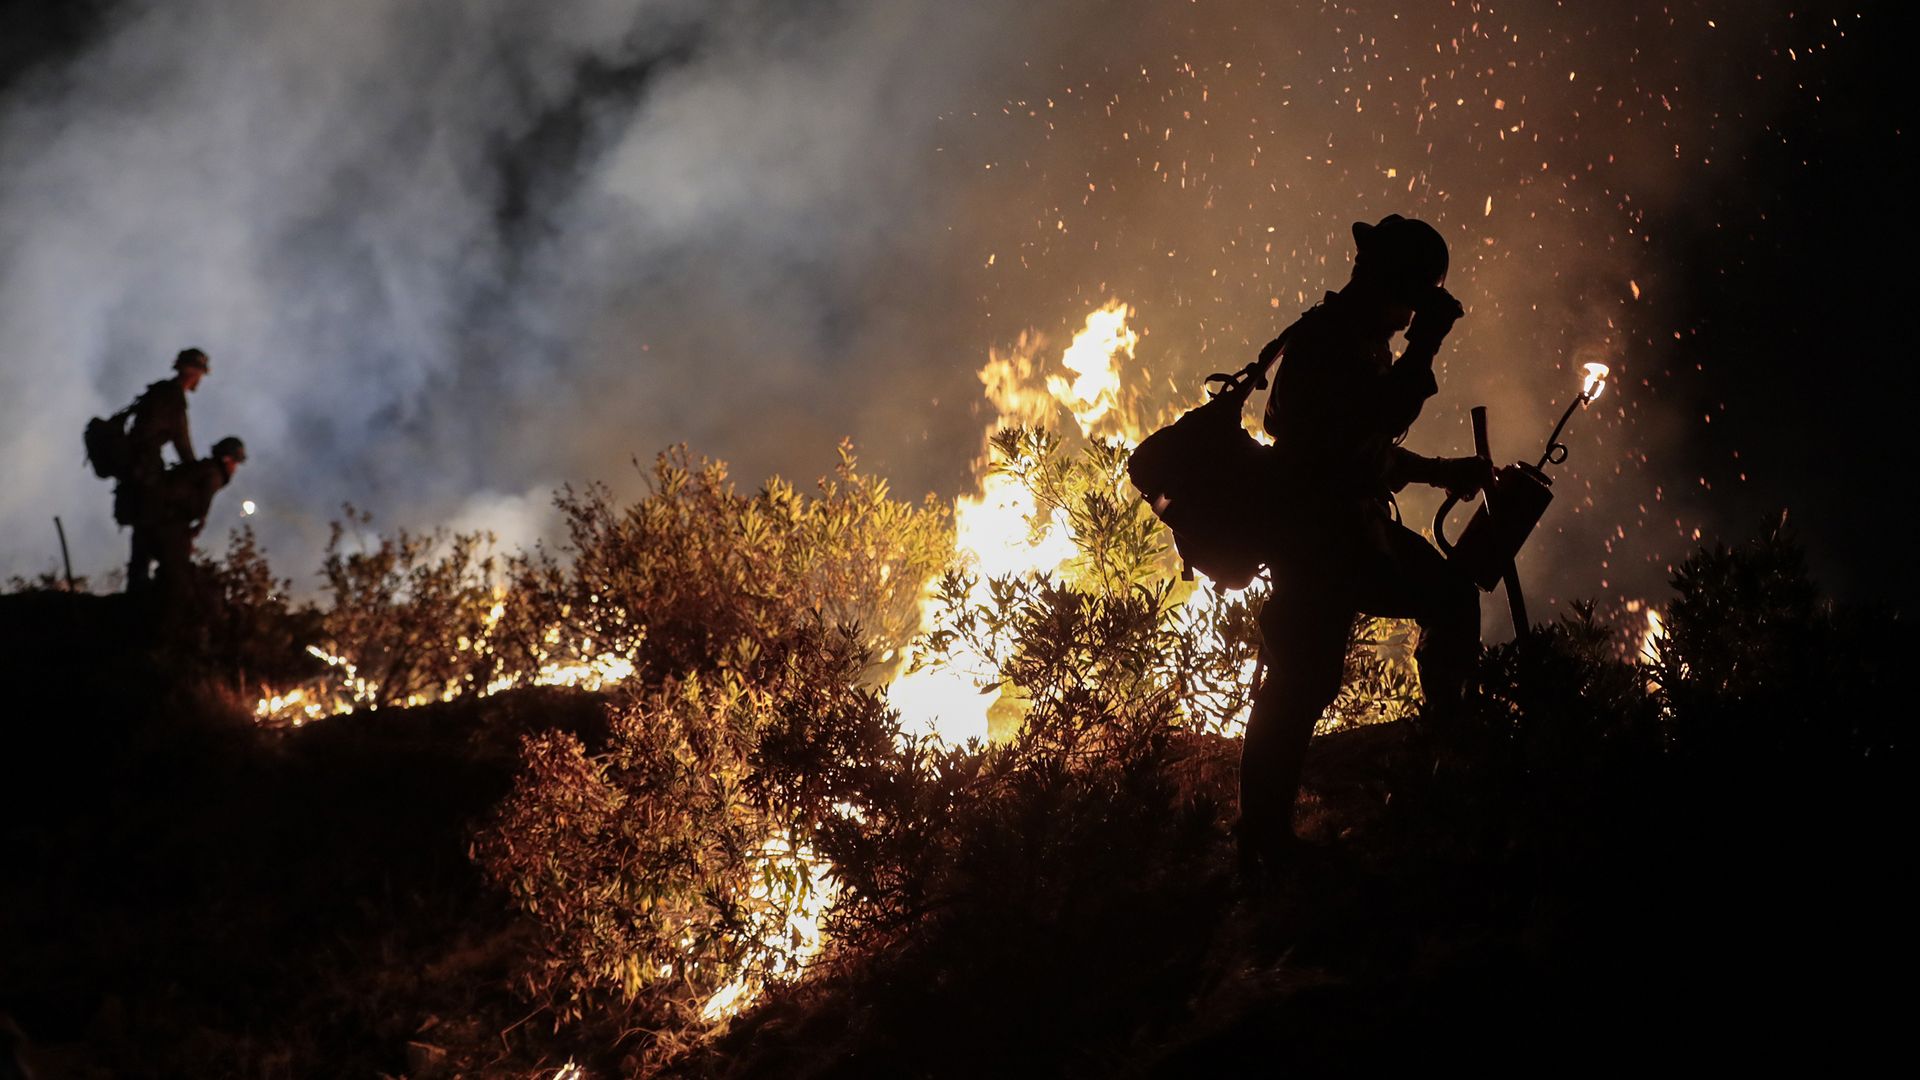 Firefighters battle the Bobcat Fire in California's Angeles National Forest on Sept. 22.